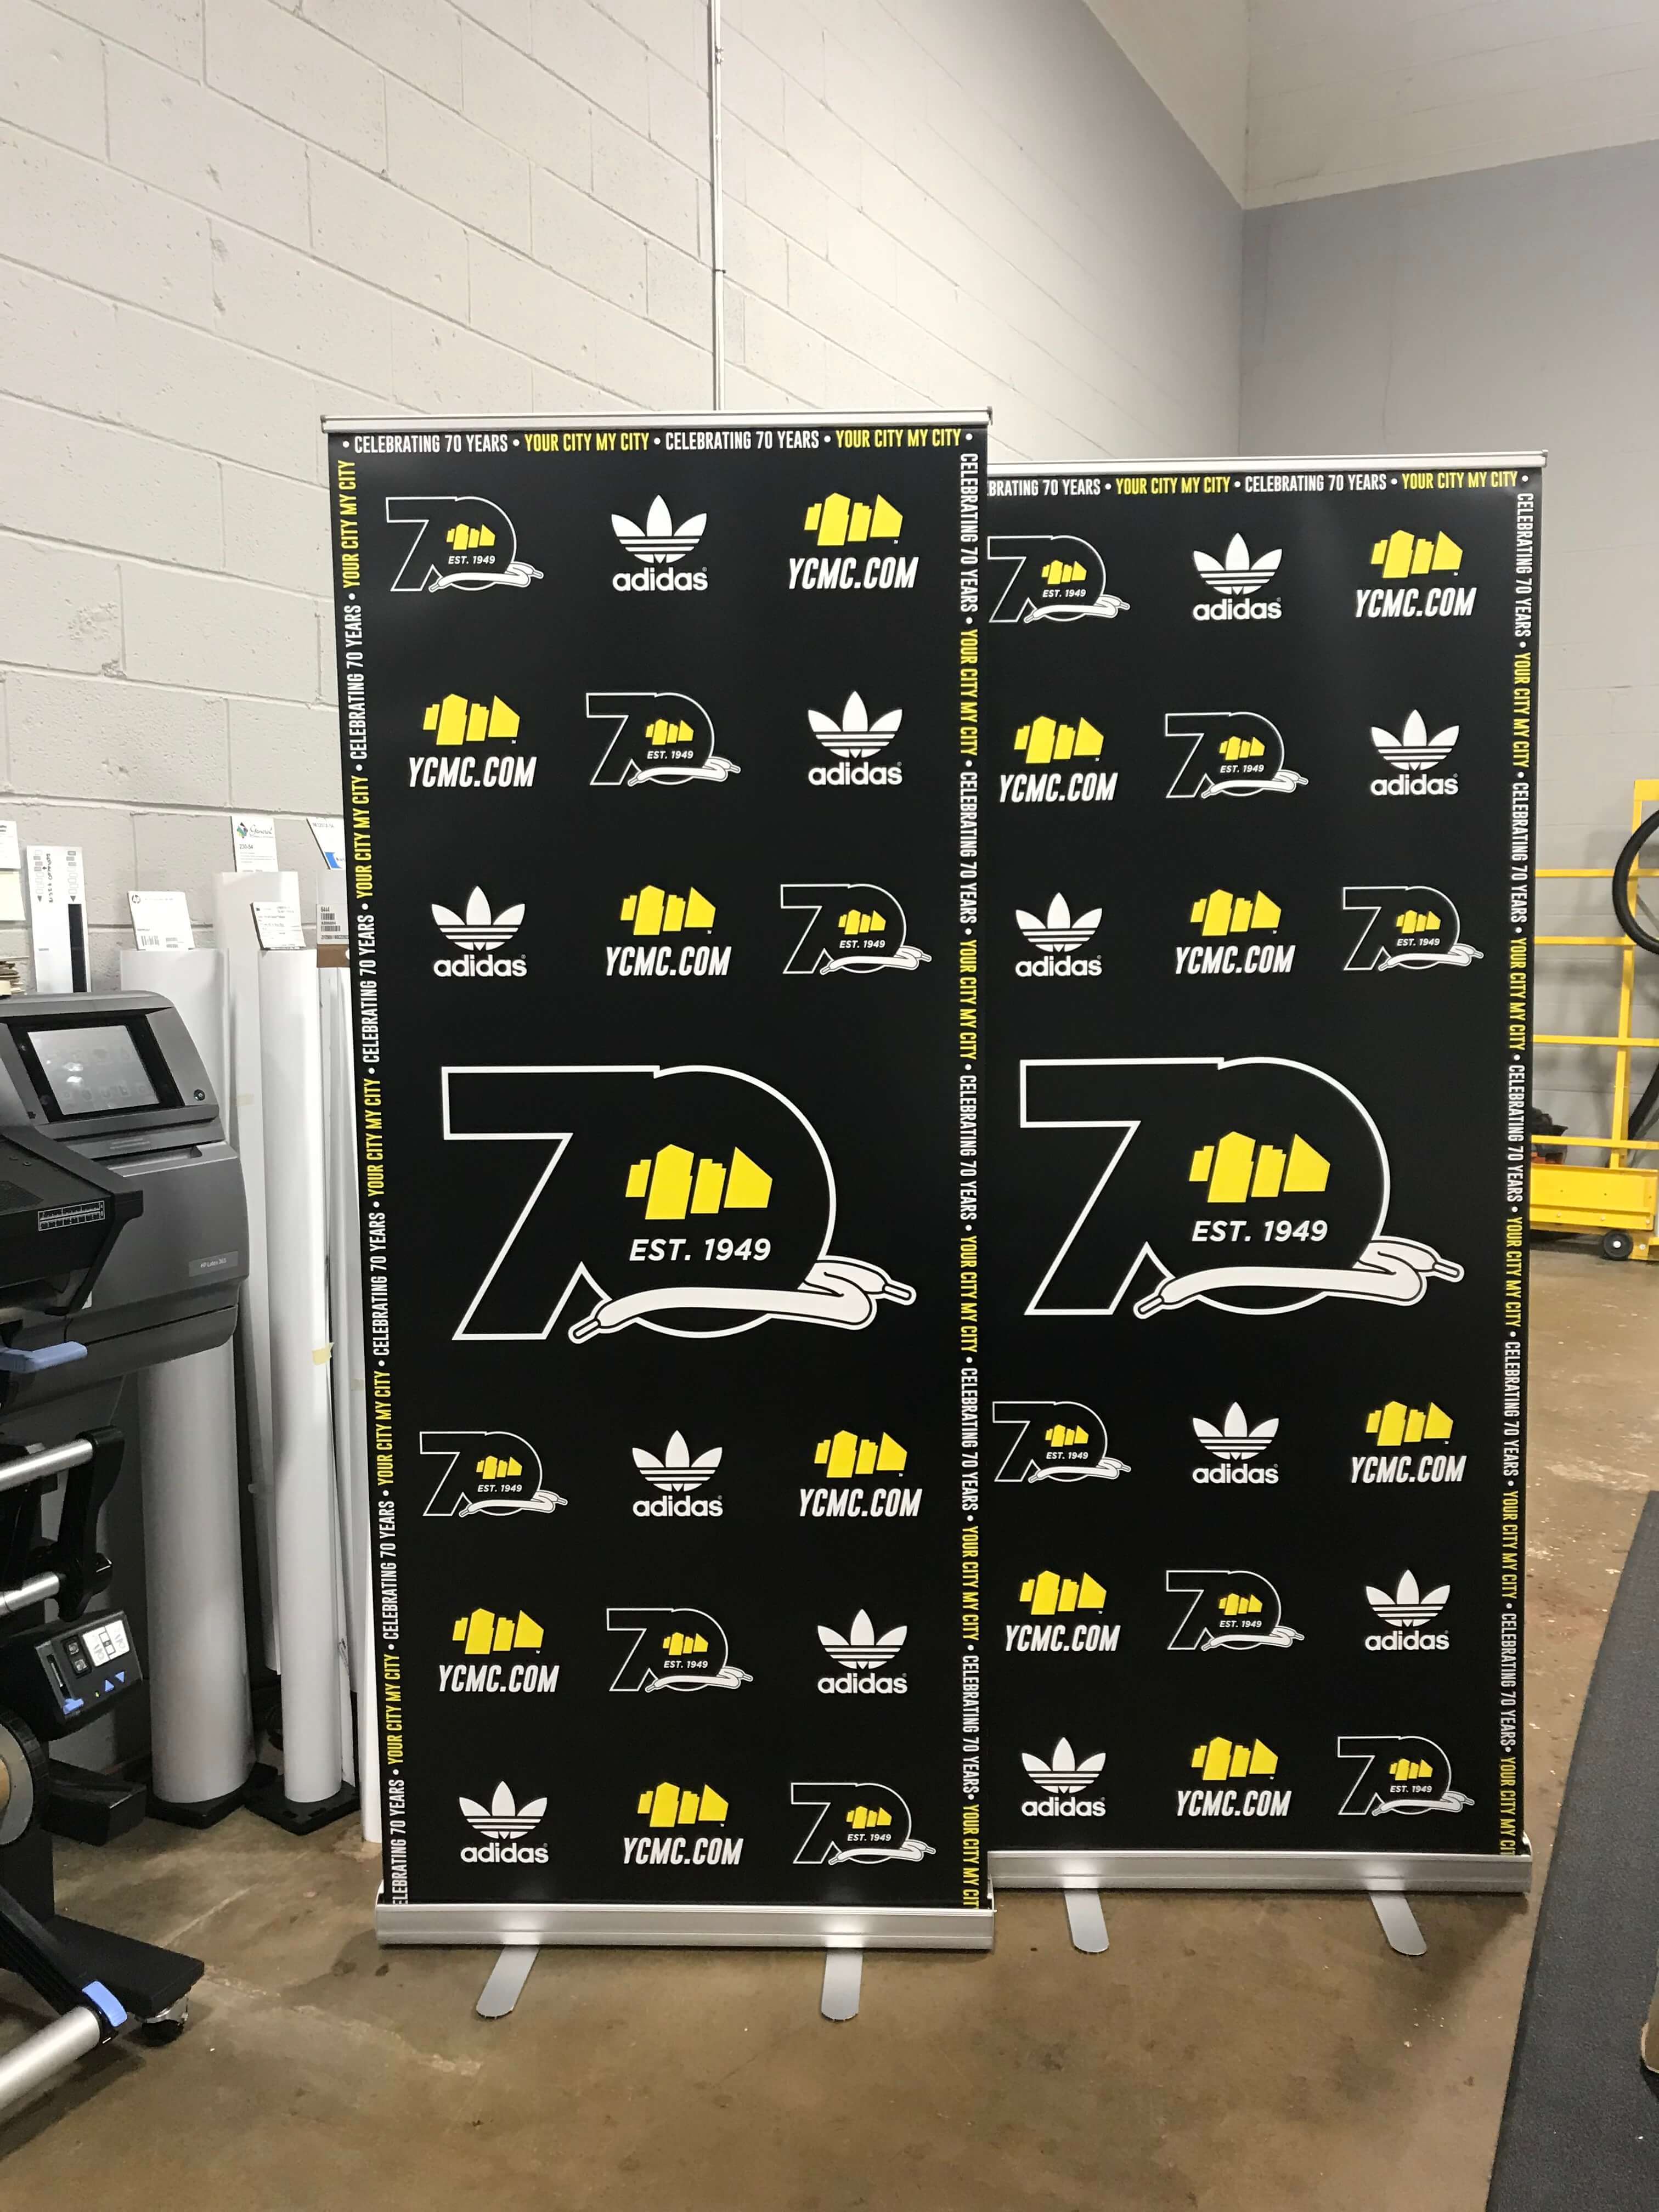 YCMC & Adidas step and repeat banner